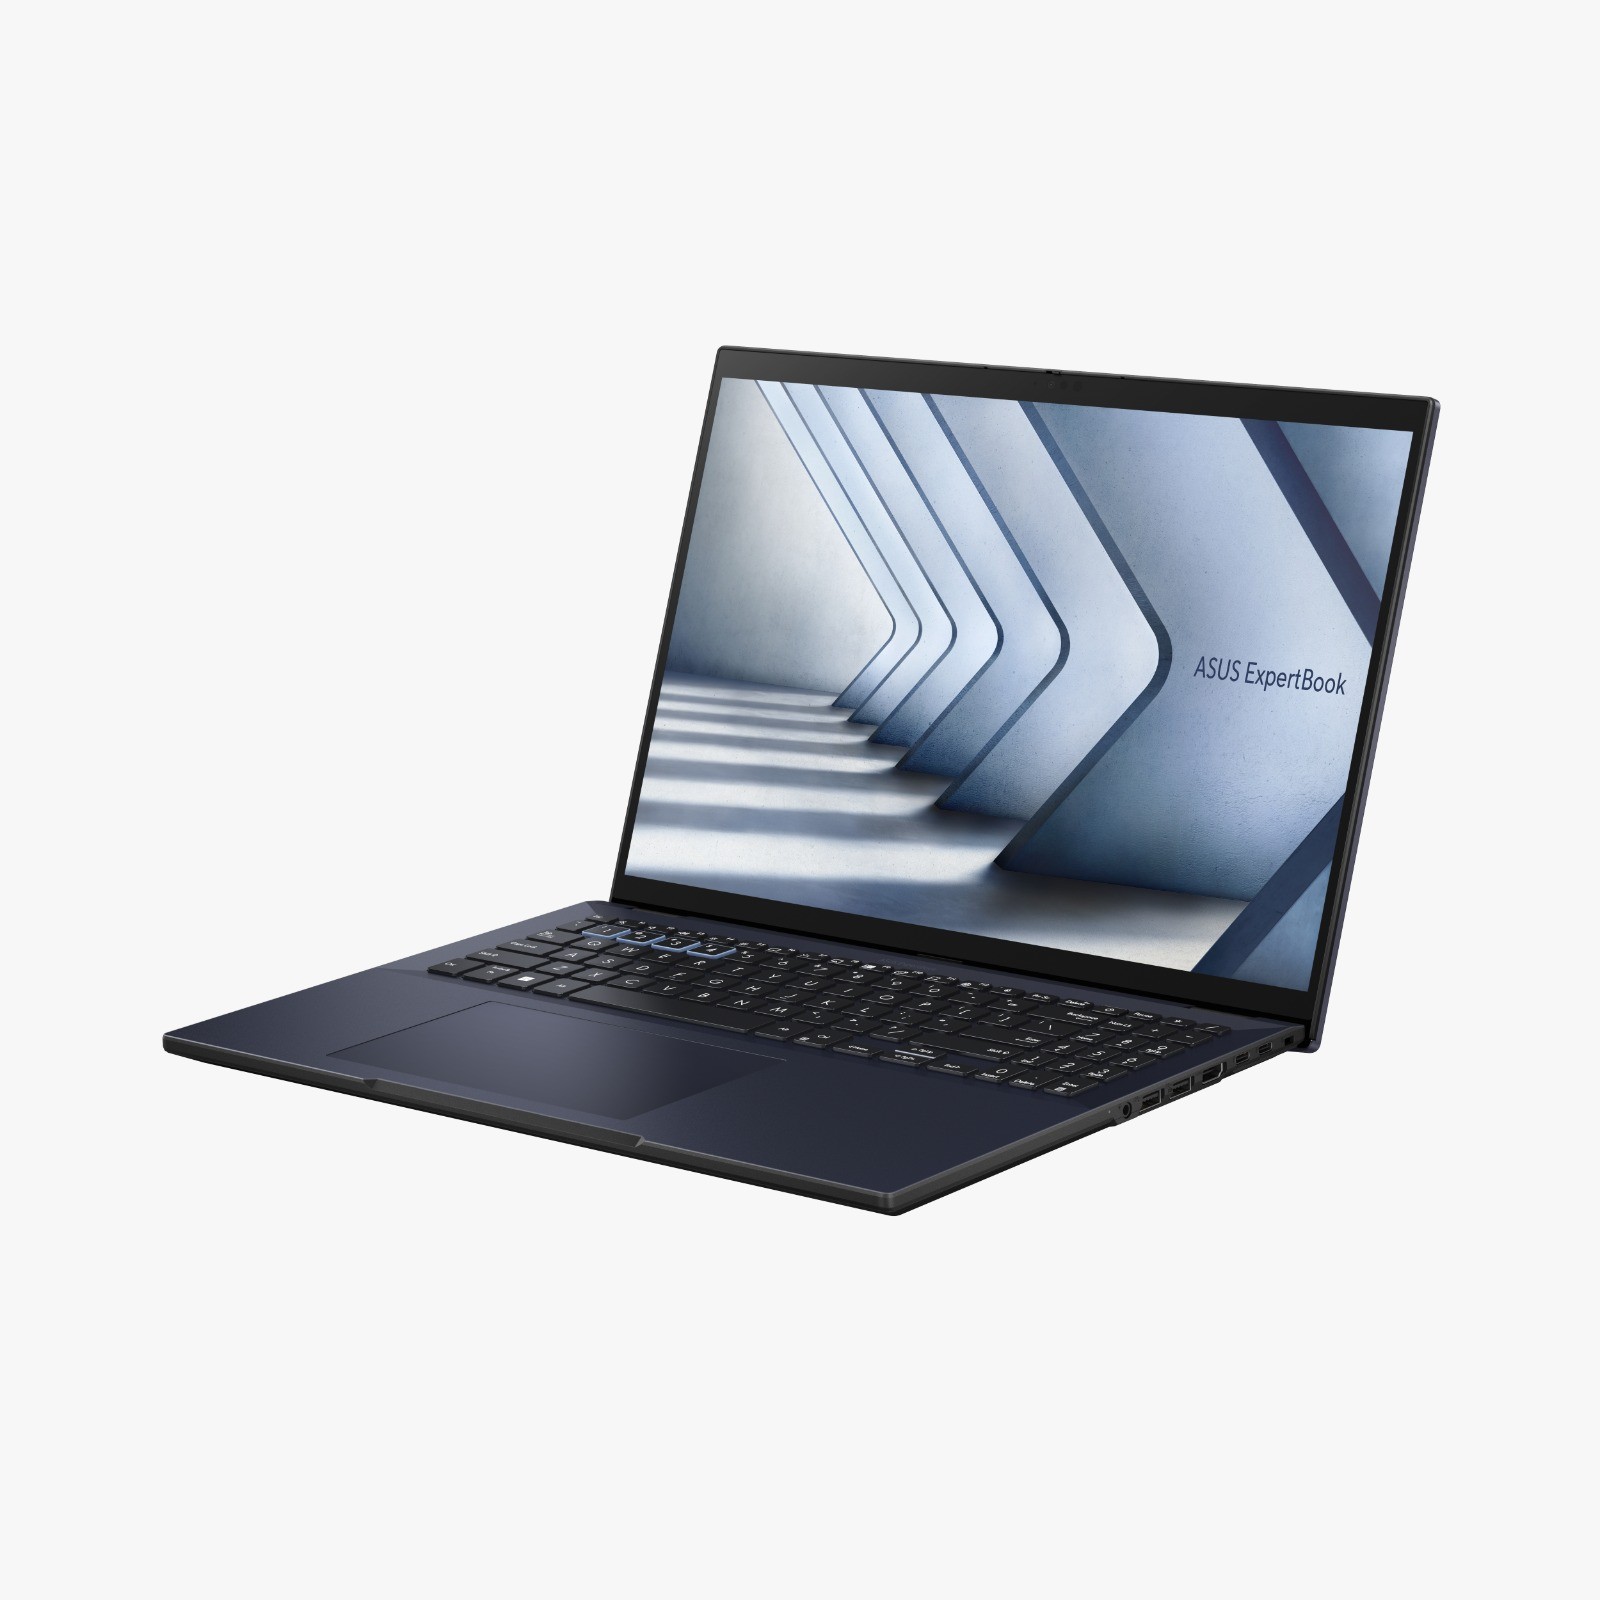 ASUS announces the availability of the new ExpertBook B3